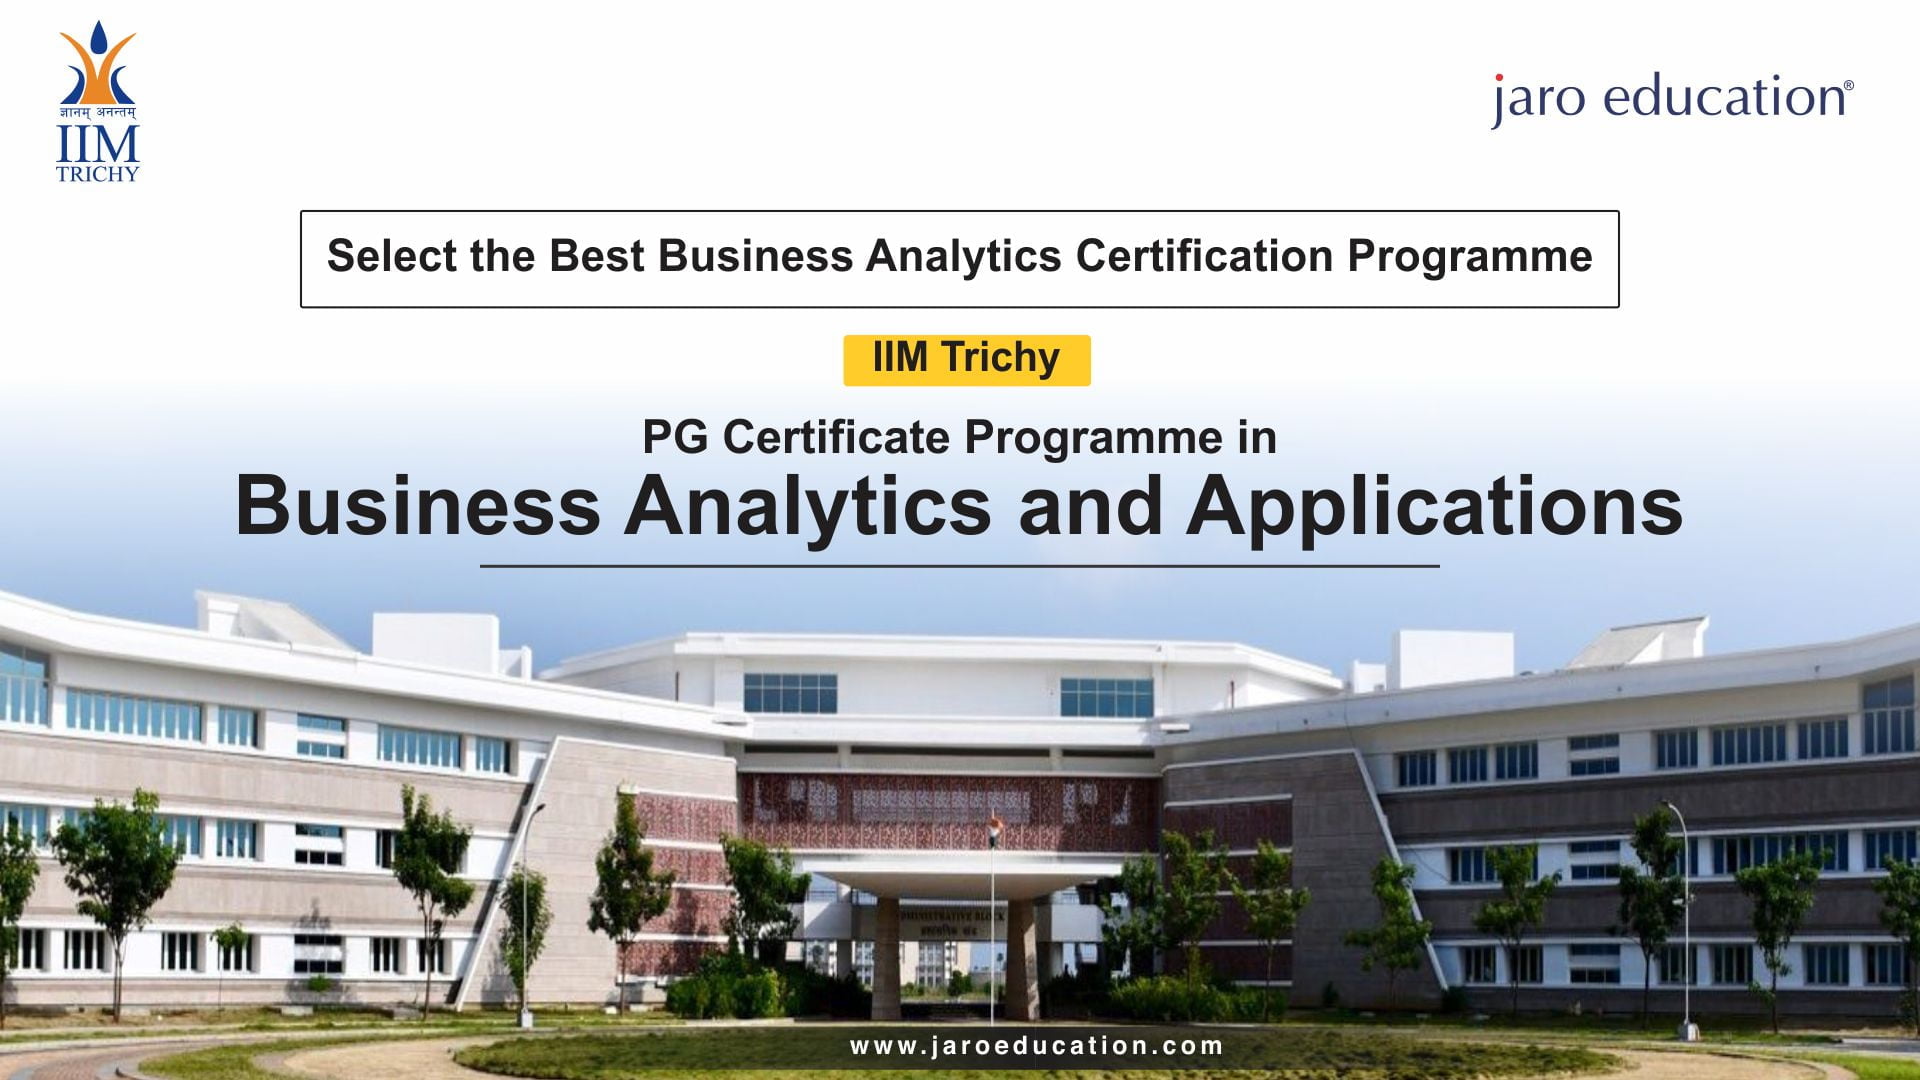 Select-the-best-business-analytics-certification-programme jaro